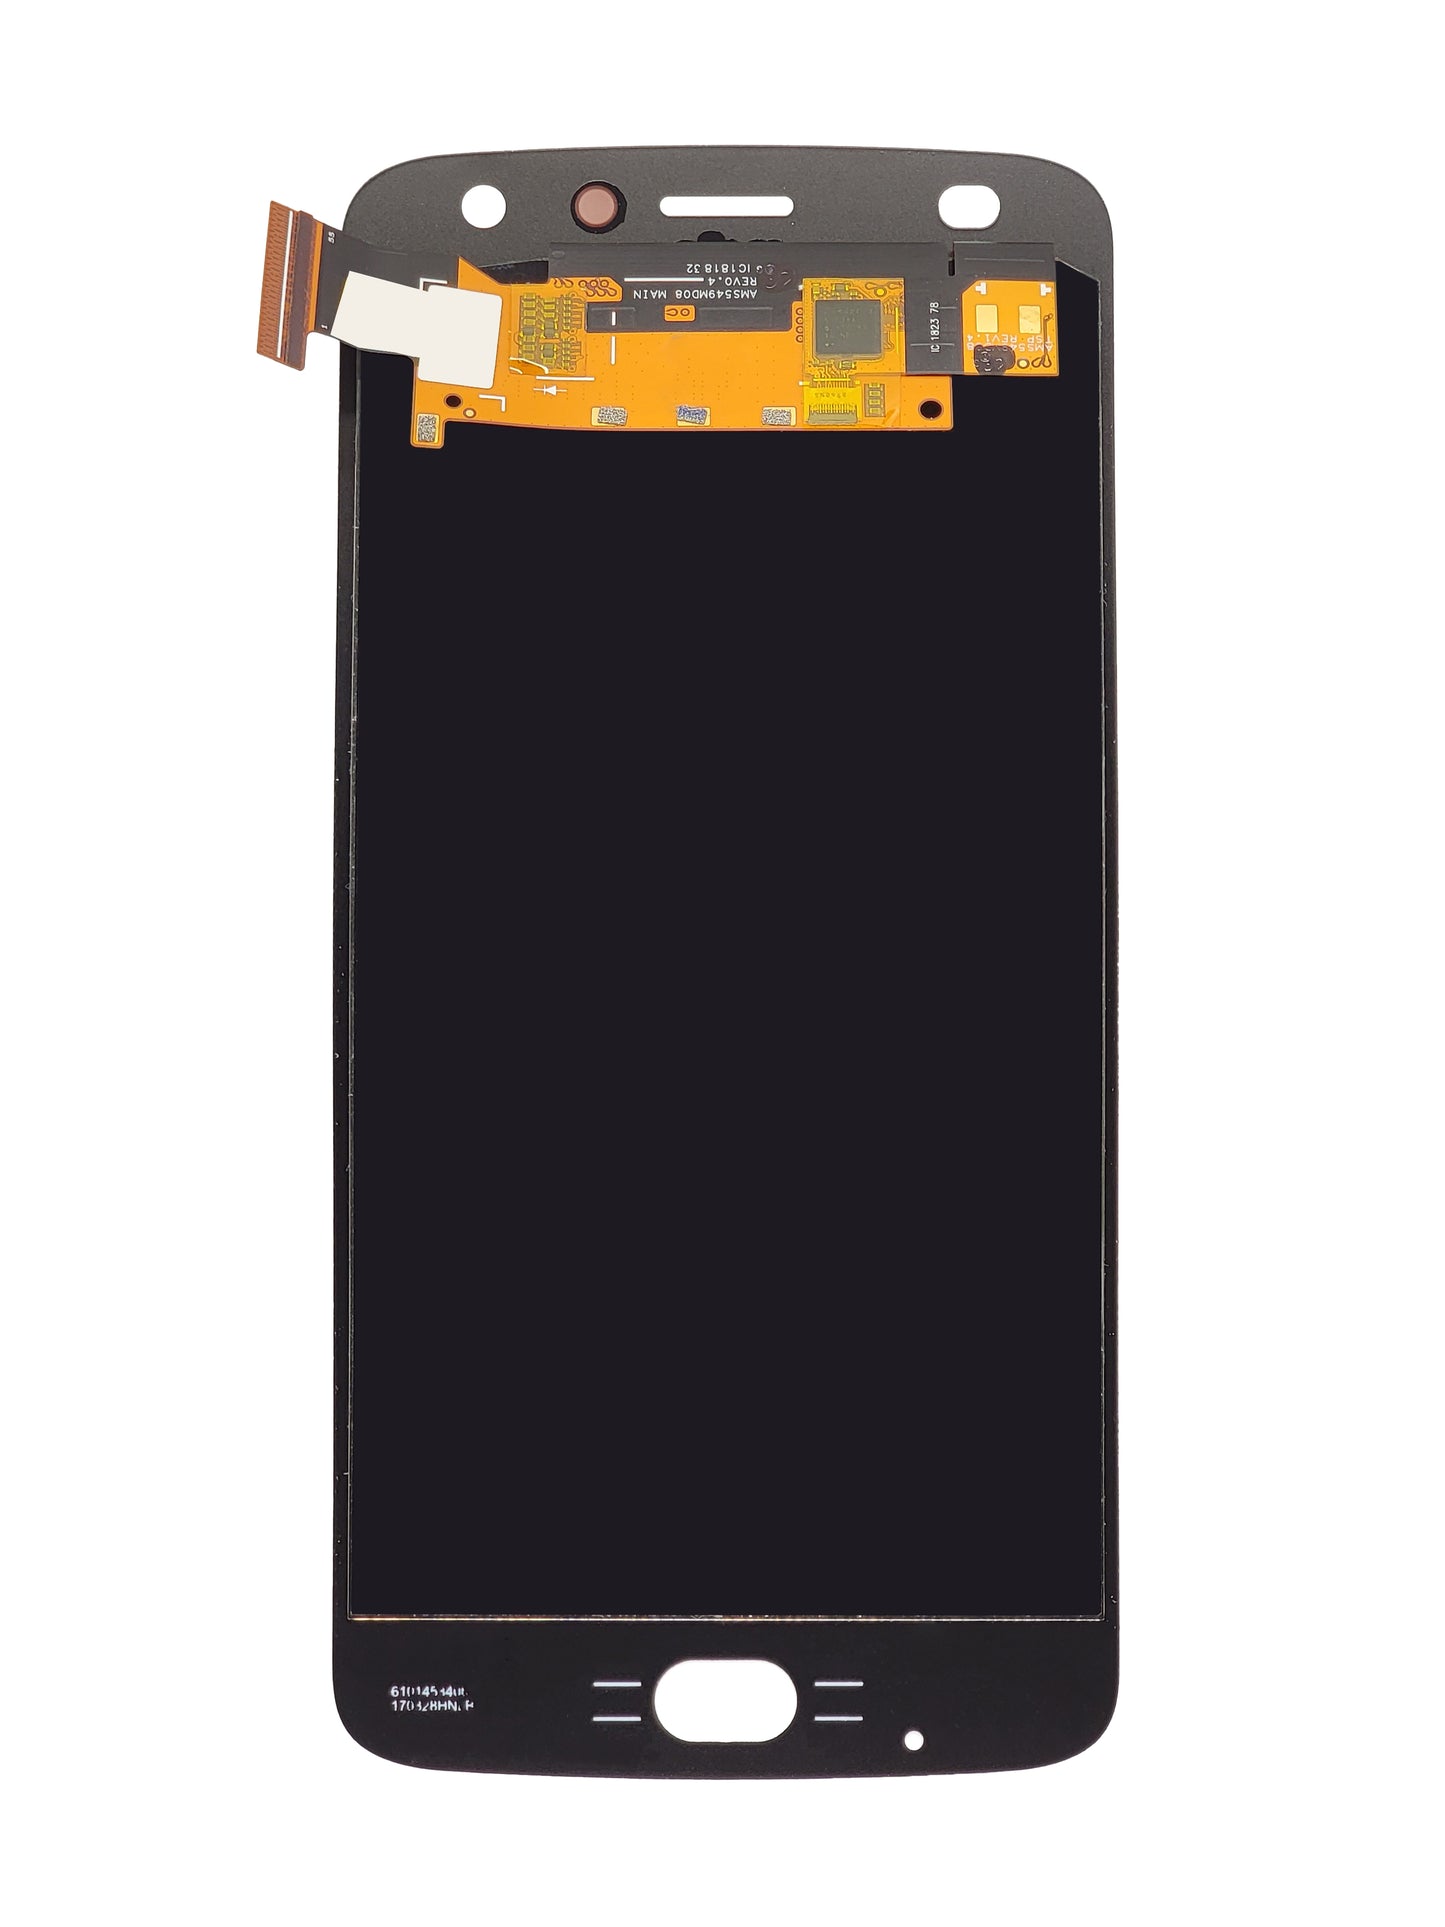 Moto Z2 Play (XT1710) Screen Assembly (Without The Frame) (Refurbished) (White)